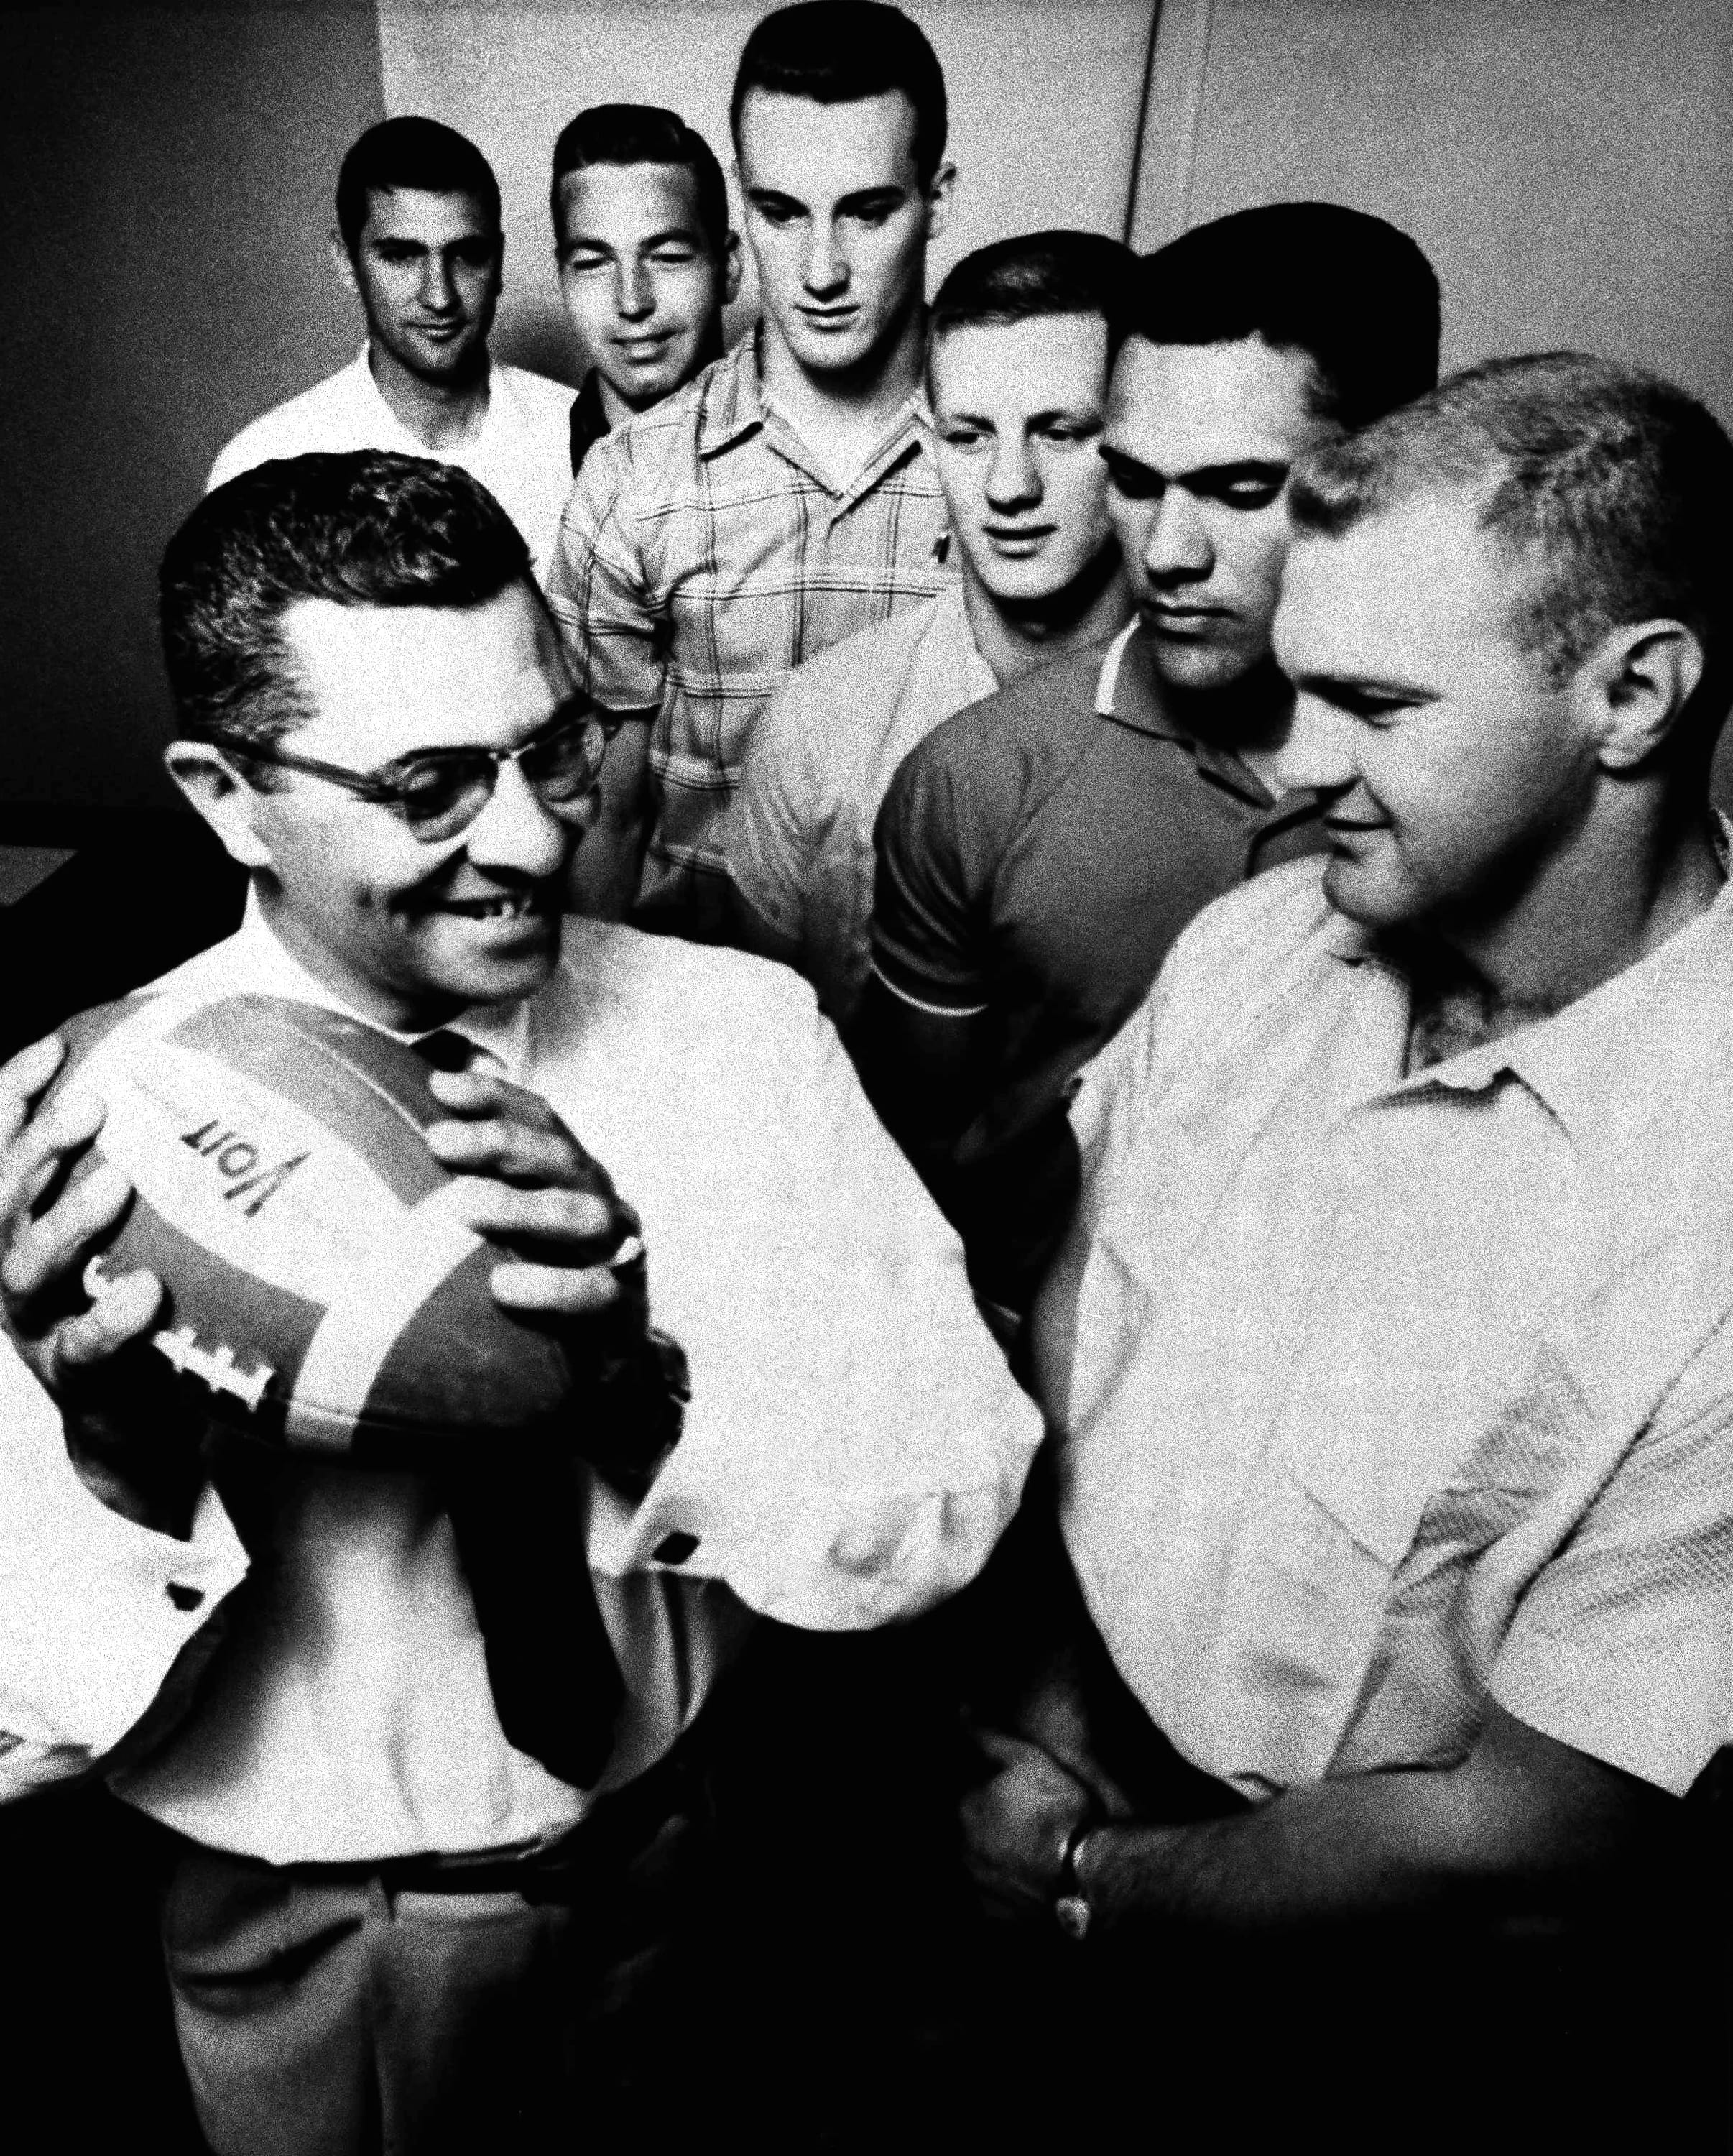 Vince Lombardi smiles while standing next to potential Green Bay Packers quarterback candidates in 1959.